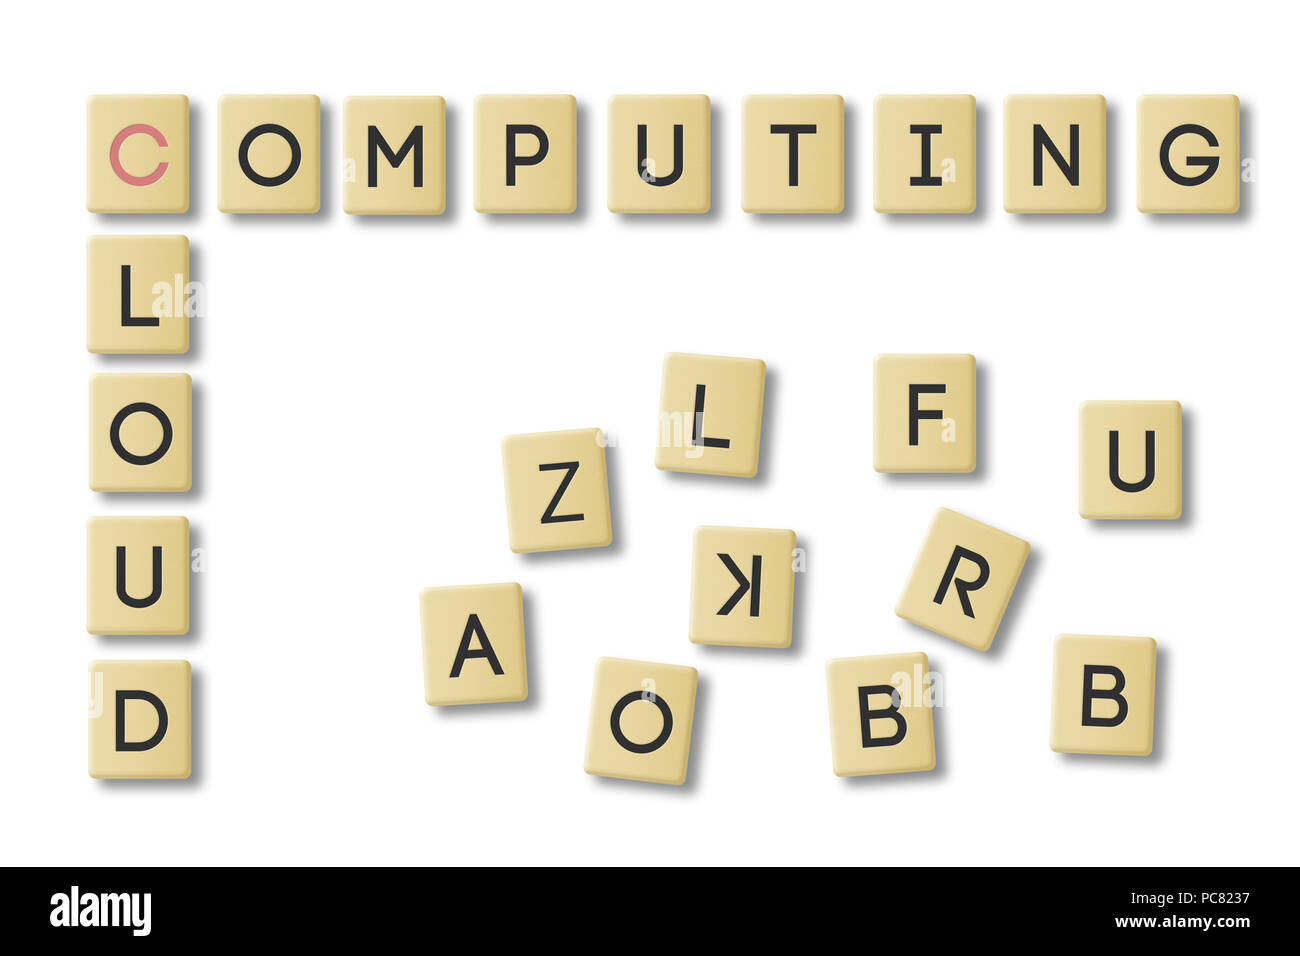 The message Cloud Computing made with scrabble tiles. Stock Photo